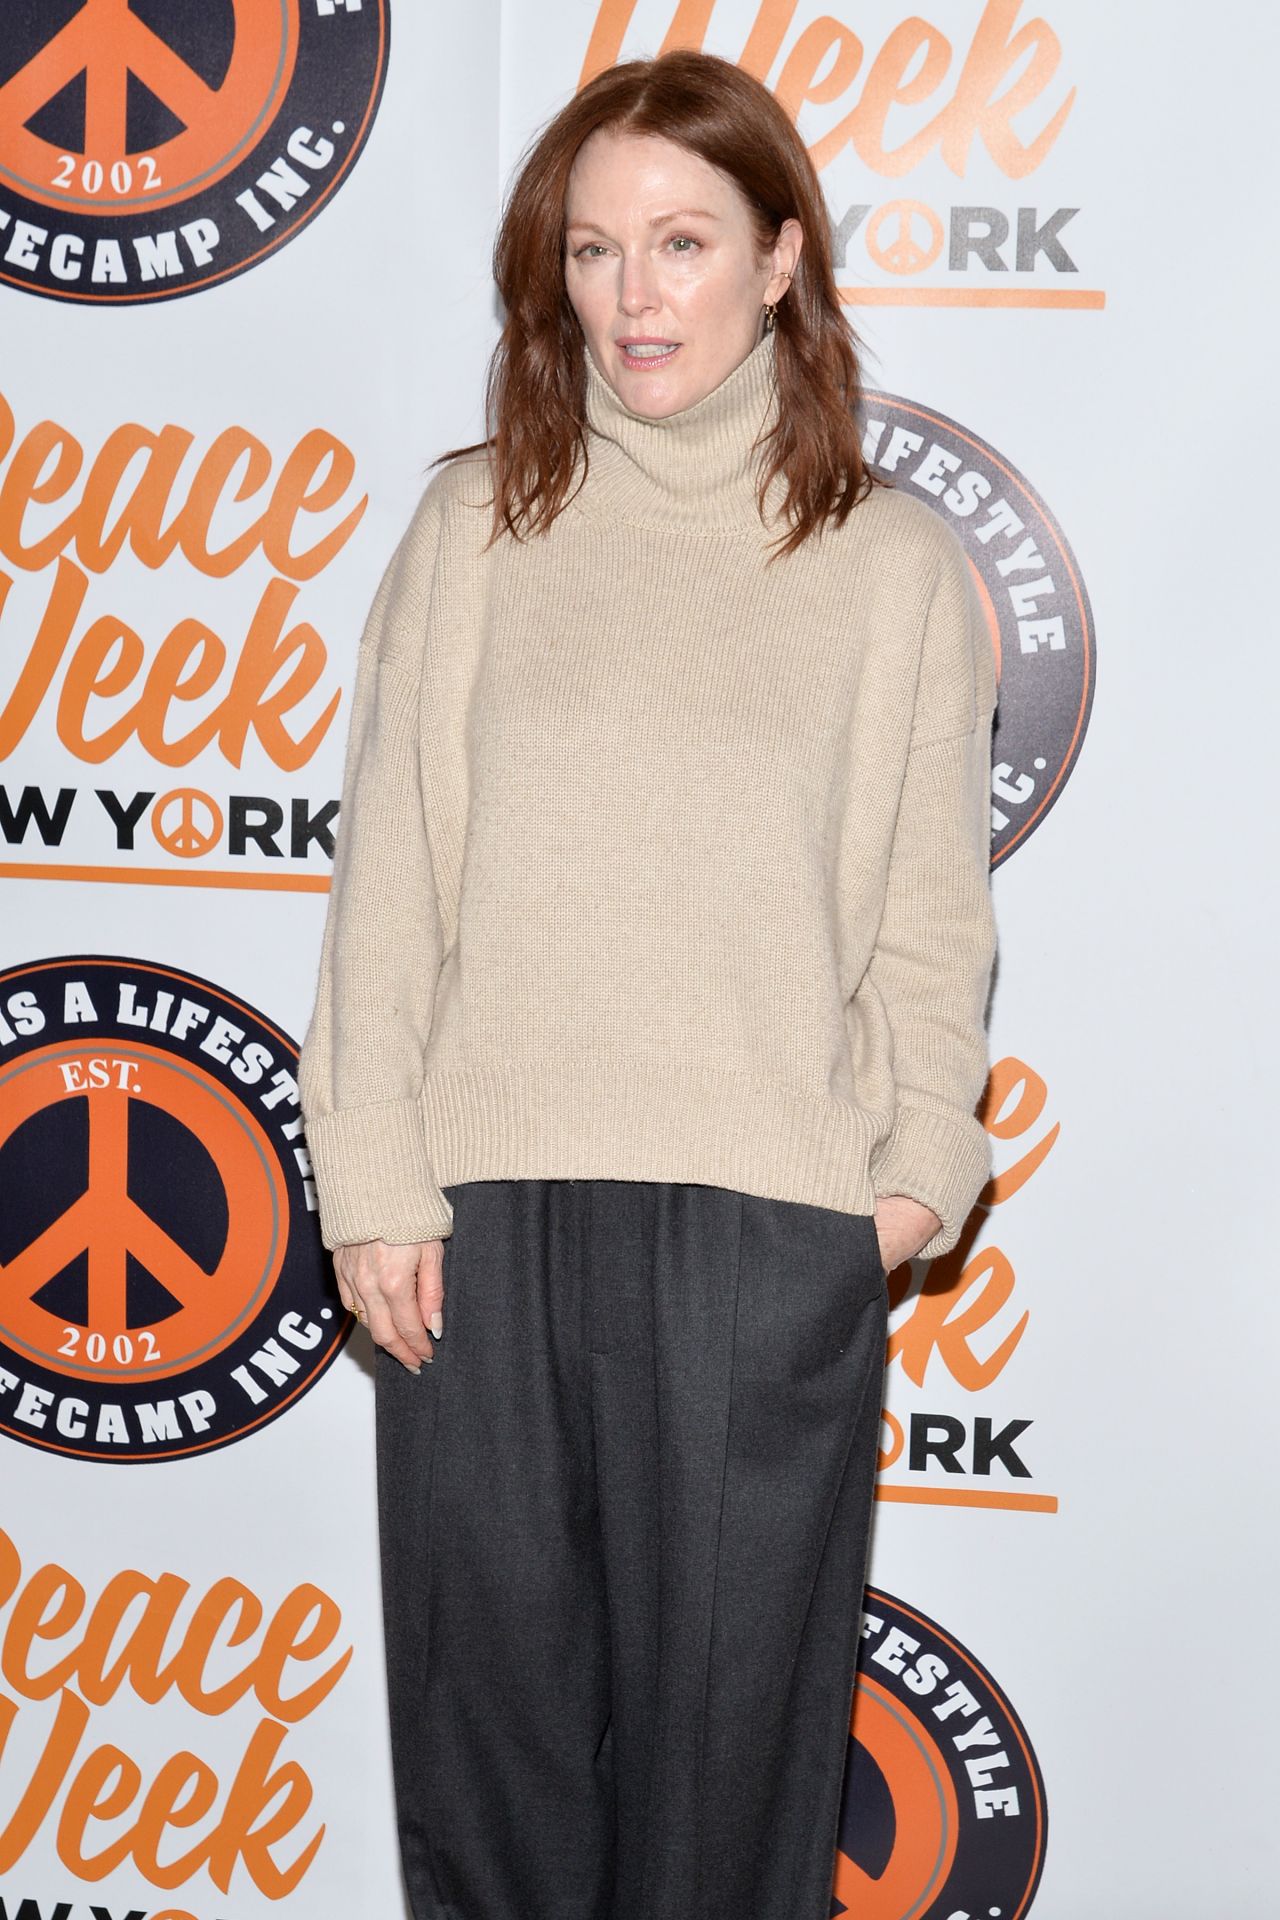 https://celebmafia.com/wp-content/uploads/2019/01/julianne-moore-9th-annual-peace-week-town-hall-in-ny-6.jpg